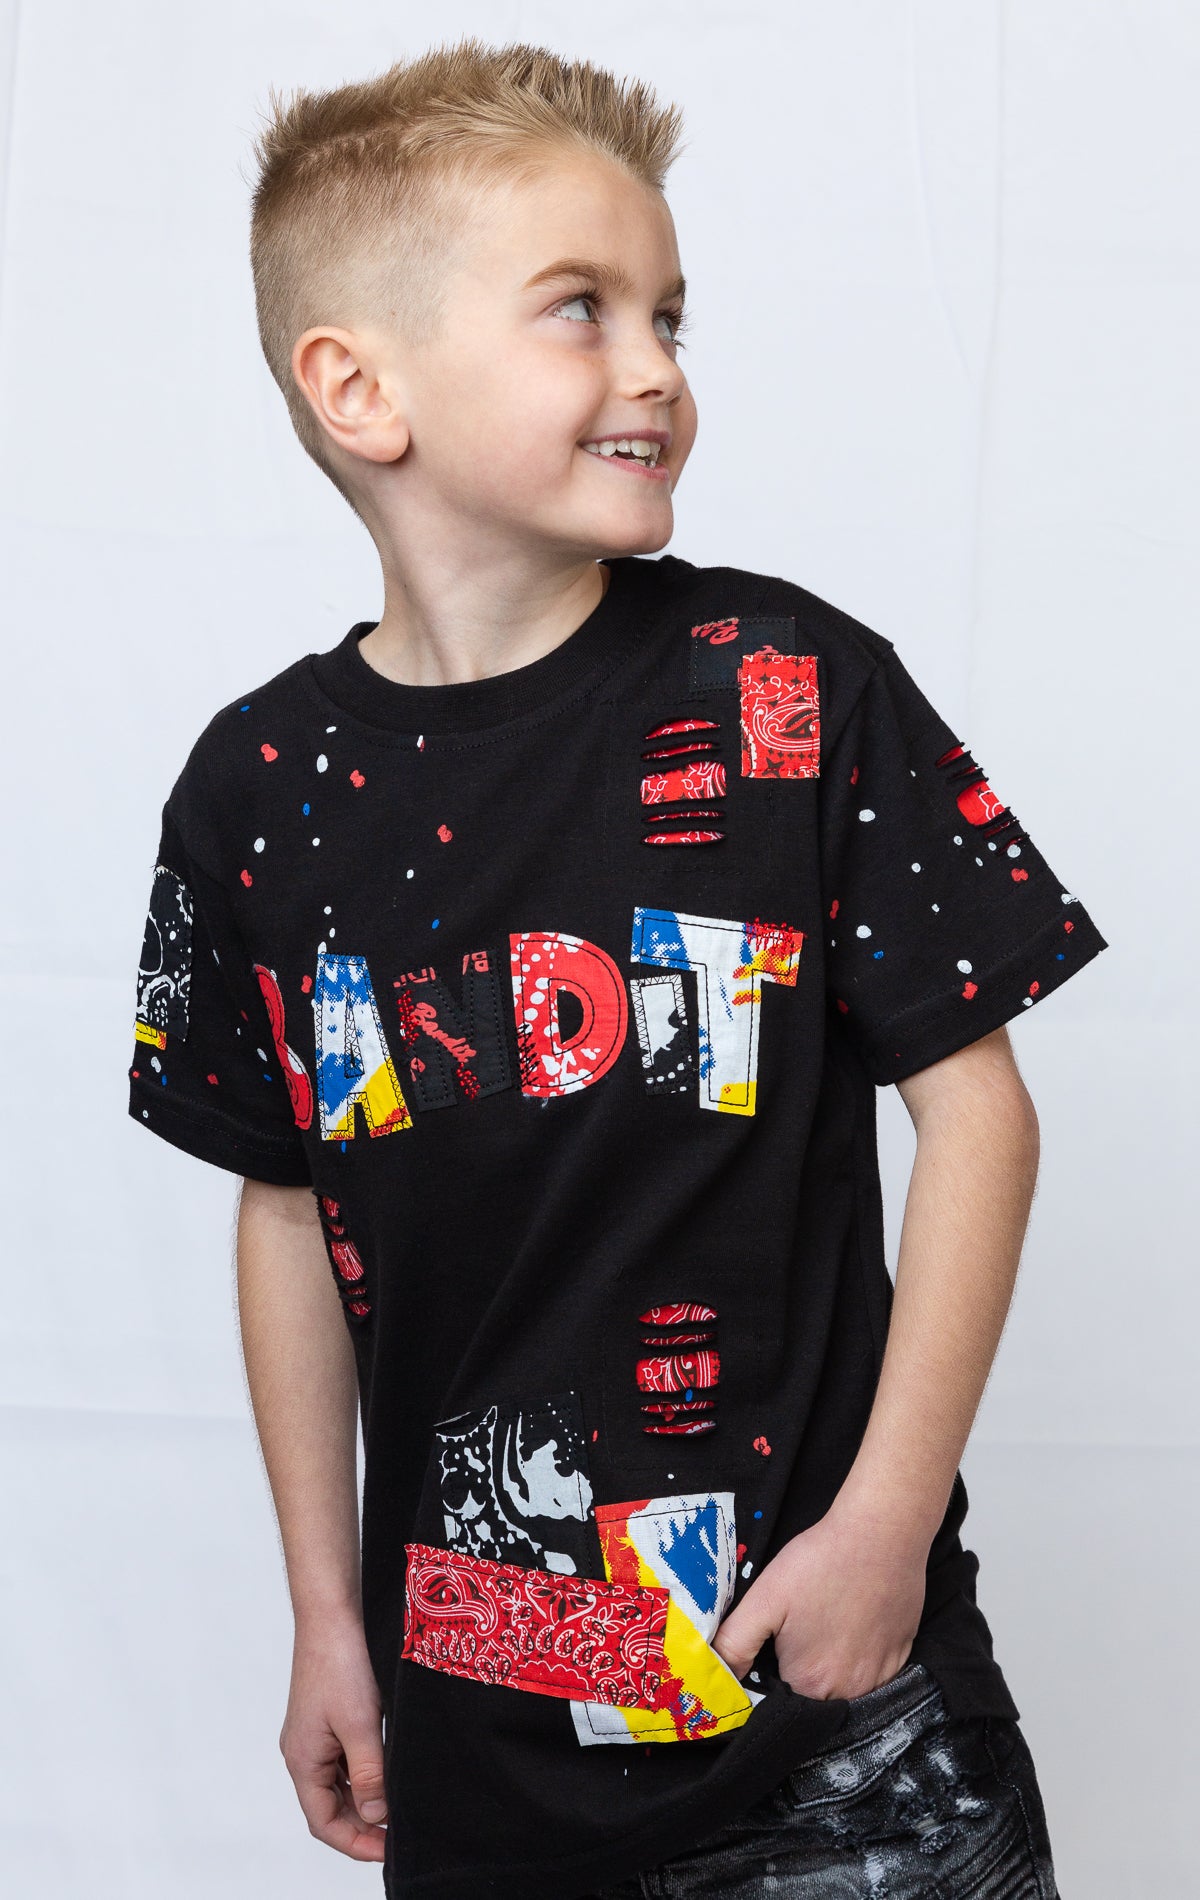 Vibrant kid's t-shirt with playful Bandit design on front.